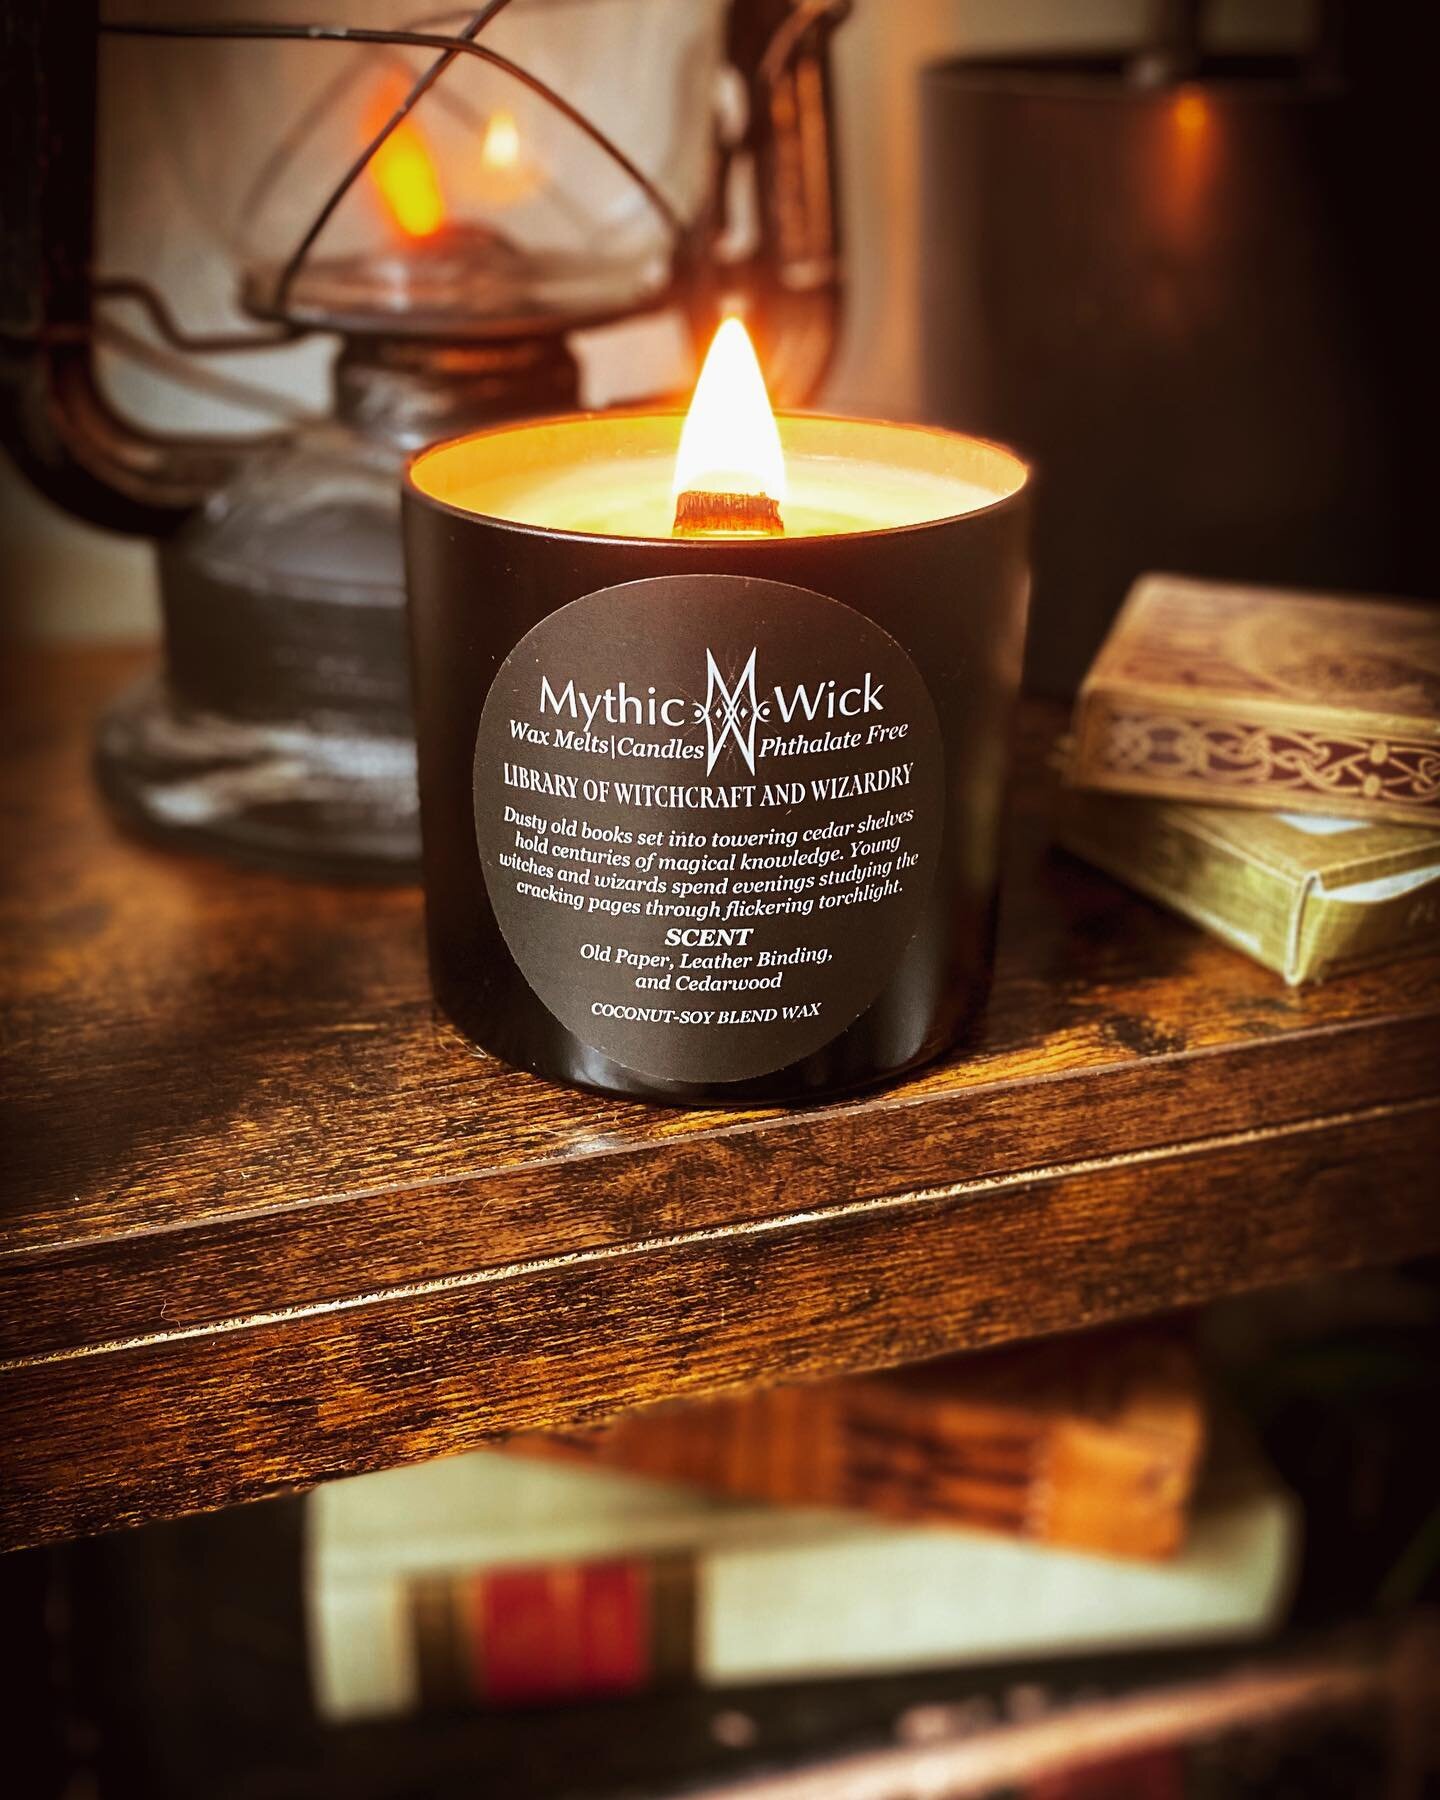 It&rsquo;s a gloomy day here in Seattle. We got a taste of spring last week and now back to storm clouds. Oh well, I&rsquo;m making the most of it by lighting my Library of Witchcraft and Wizardry candle and enjoying a cozy cup of tea.

Anyone readin